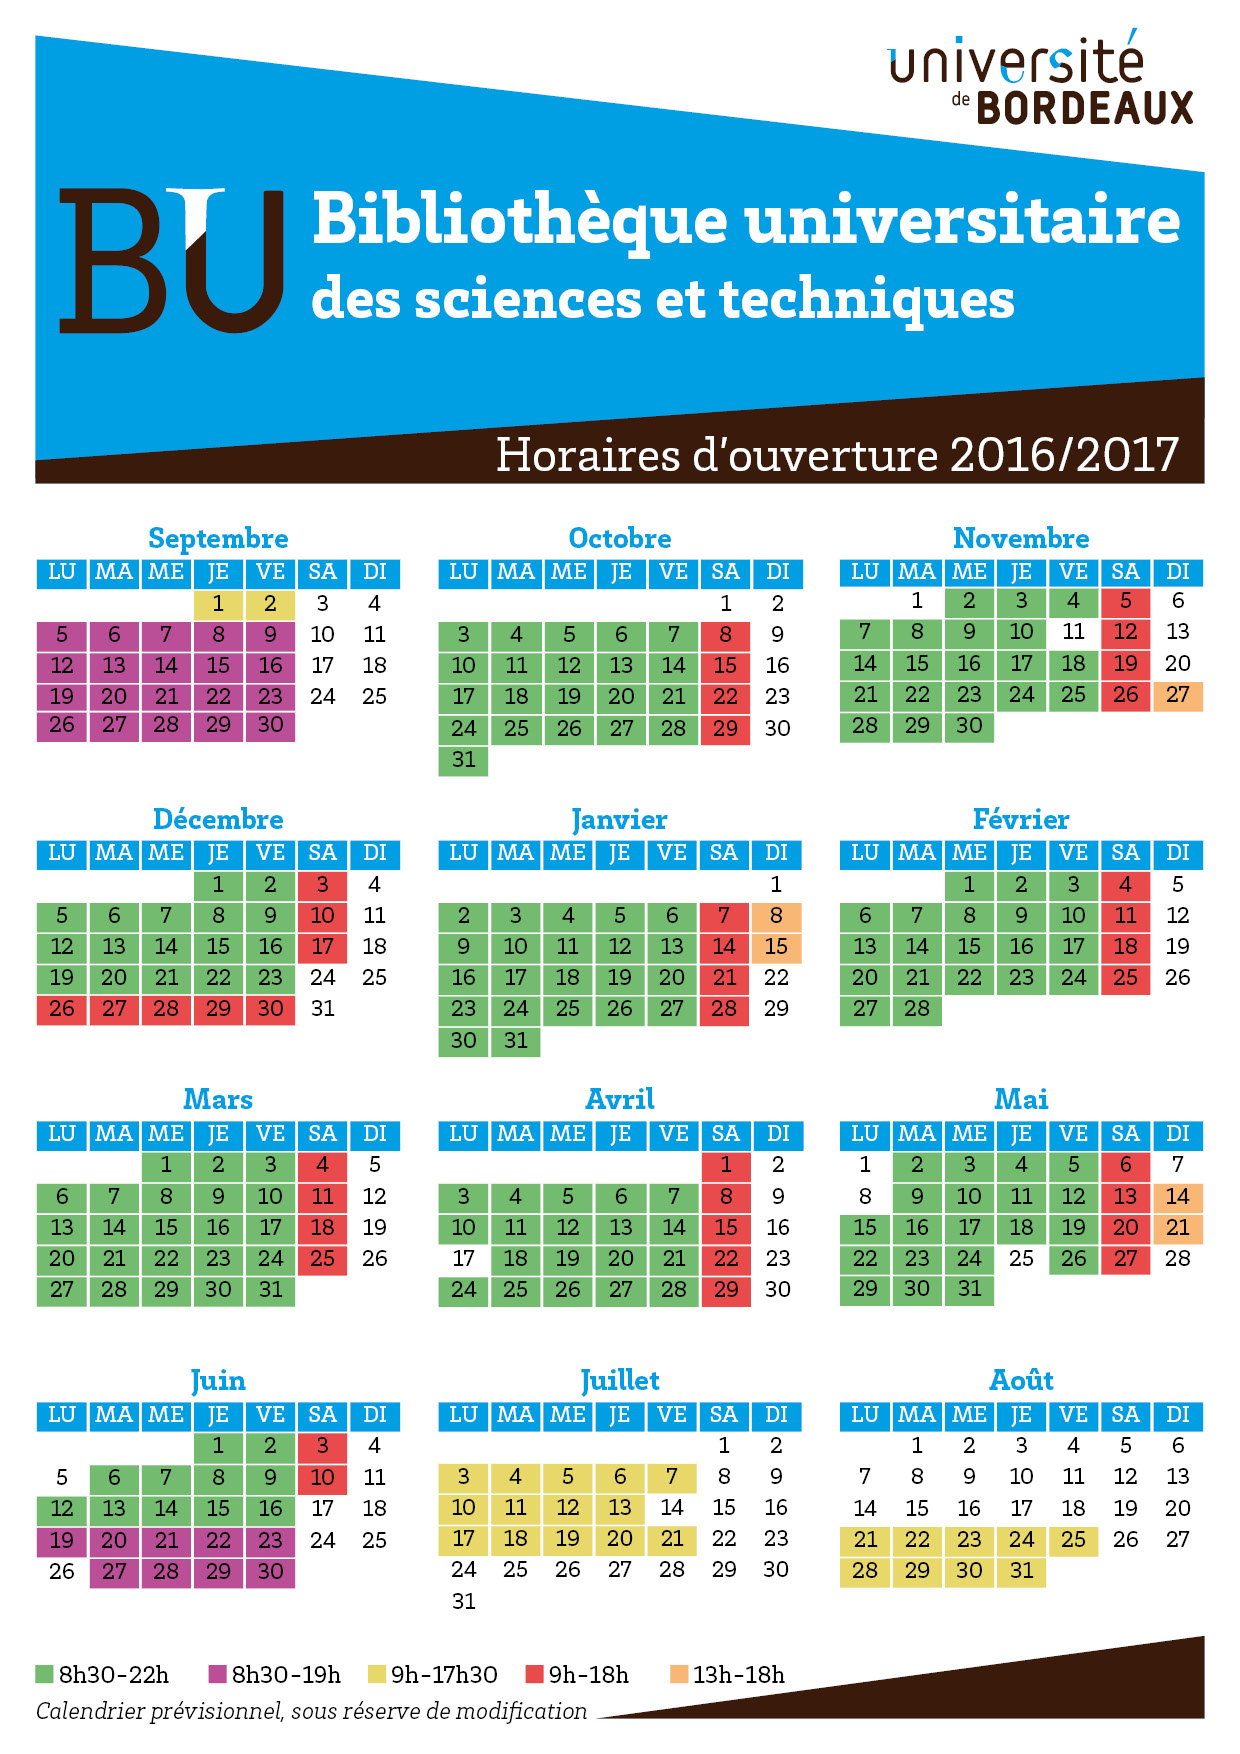 Horaires BUST 2016-2017